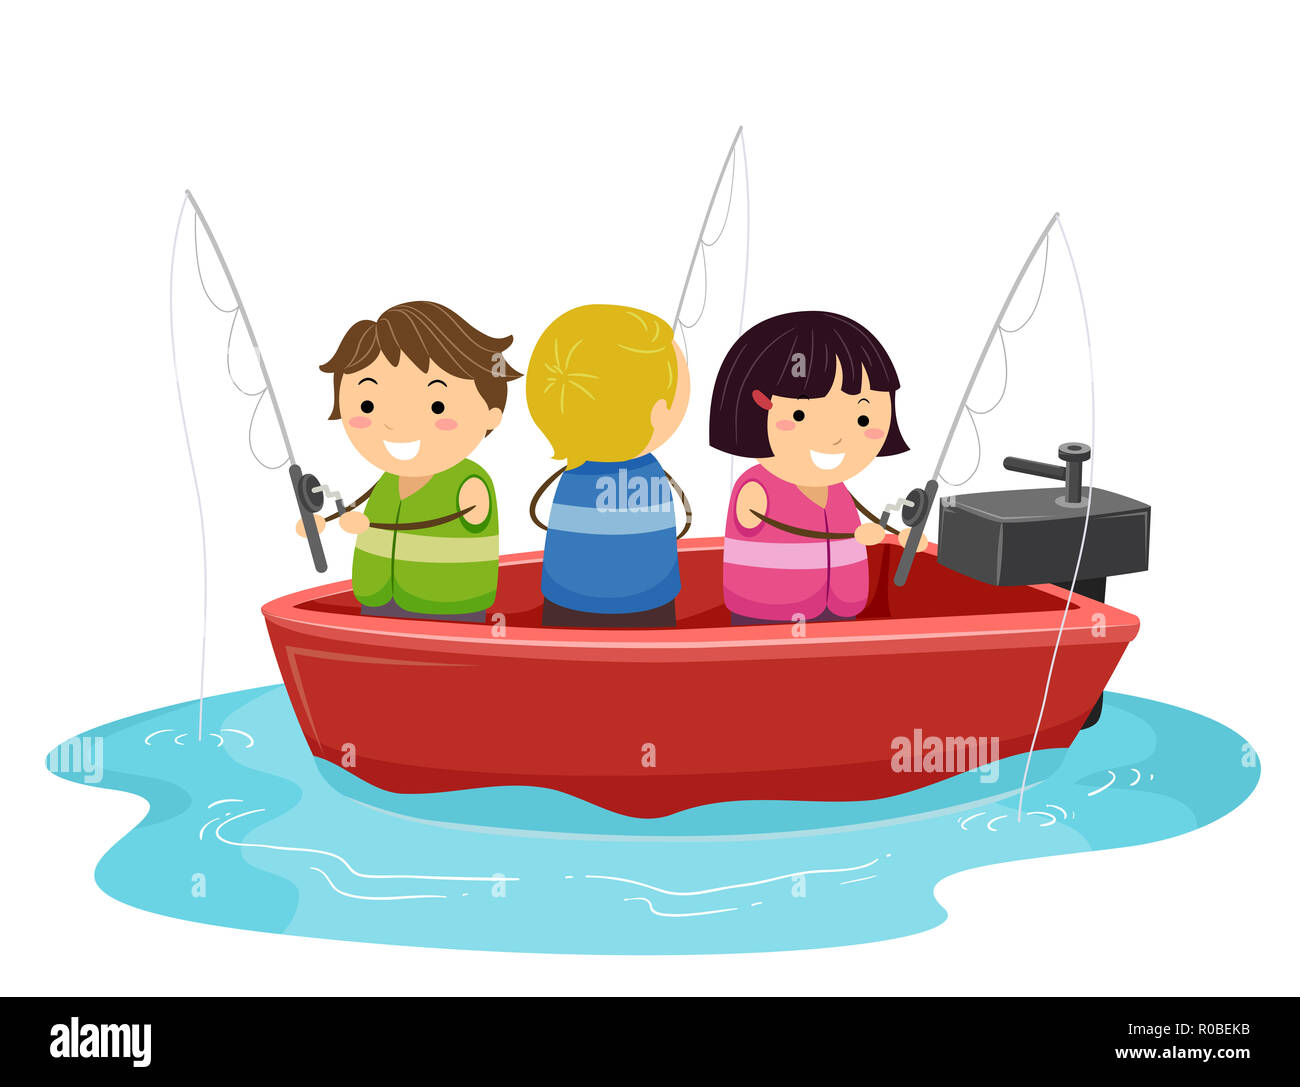 https://c8.alamy.com/comp/R0BEKB/illustration-of-stickman-kids-fishing-on-a-motor-boat-out-in-the-sea-R0BEKB.jpg